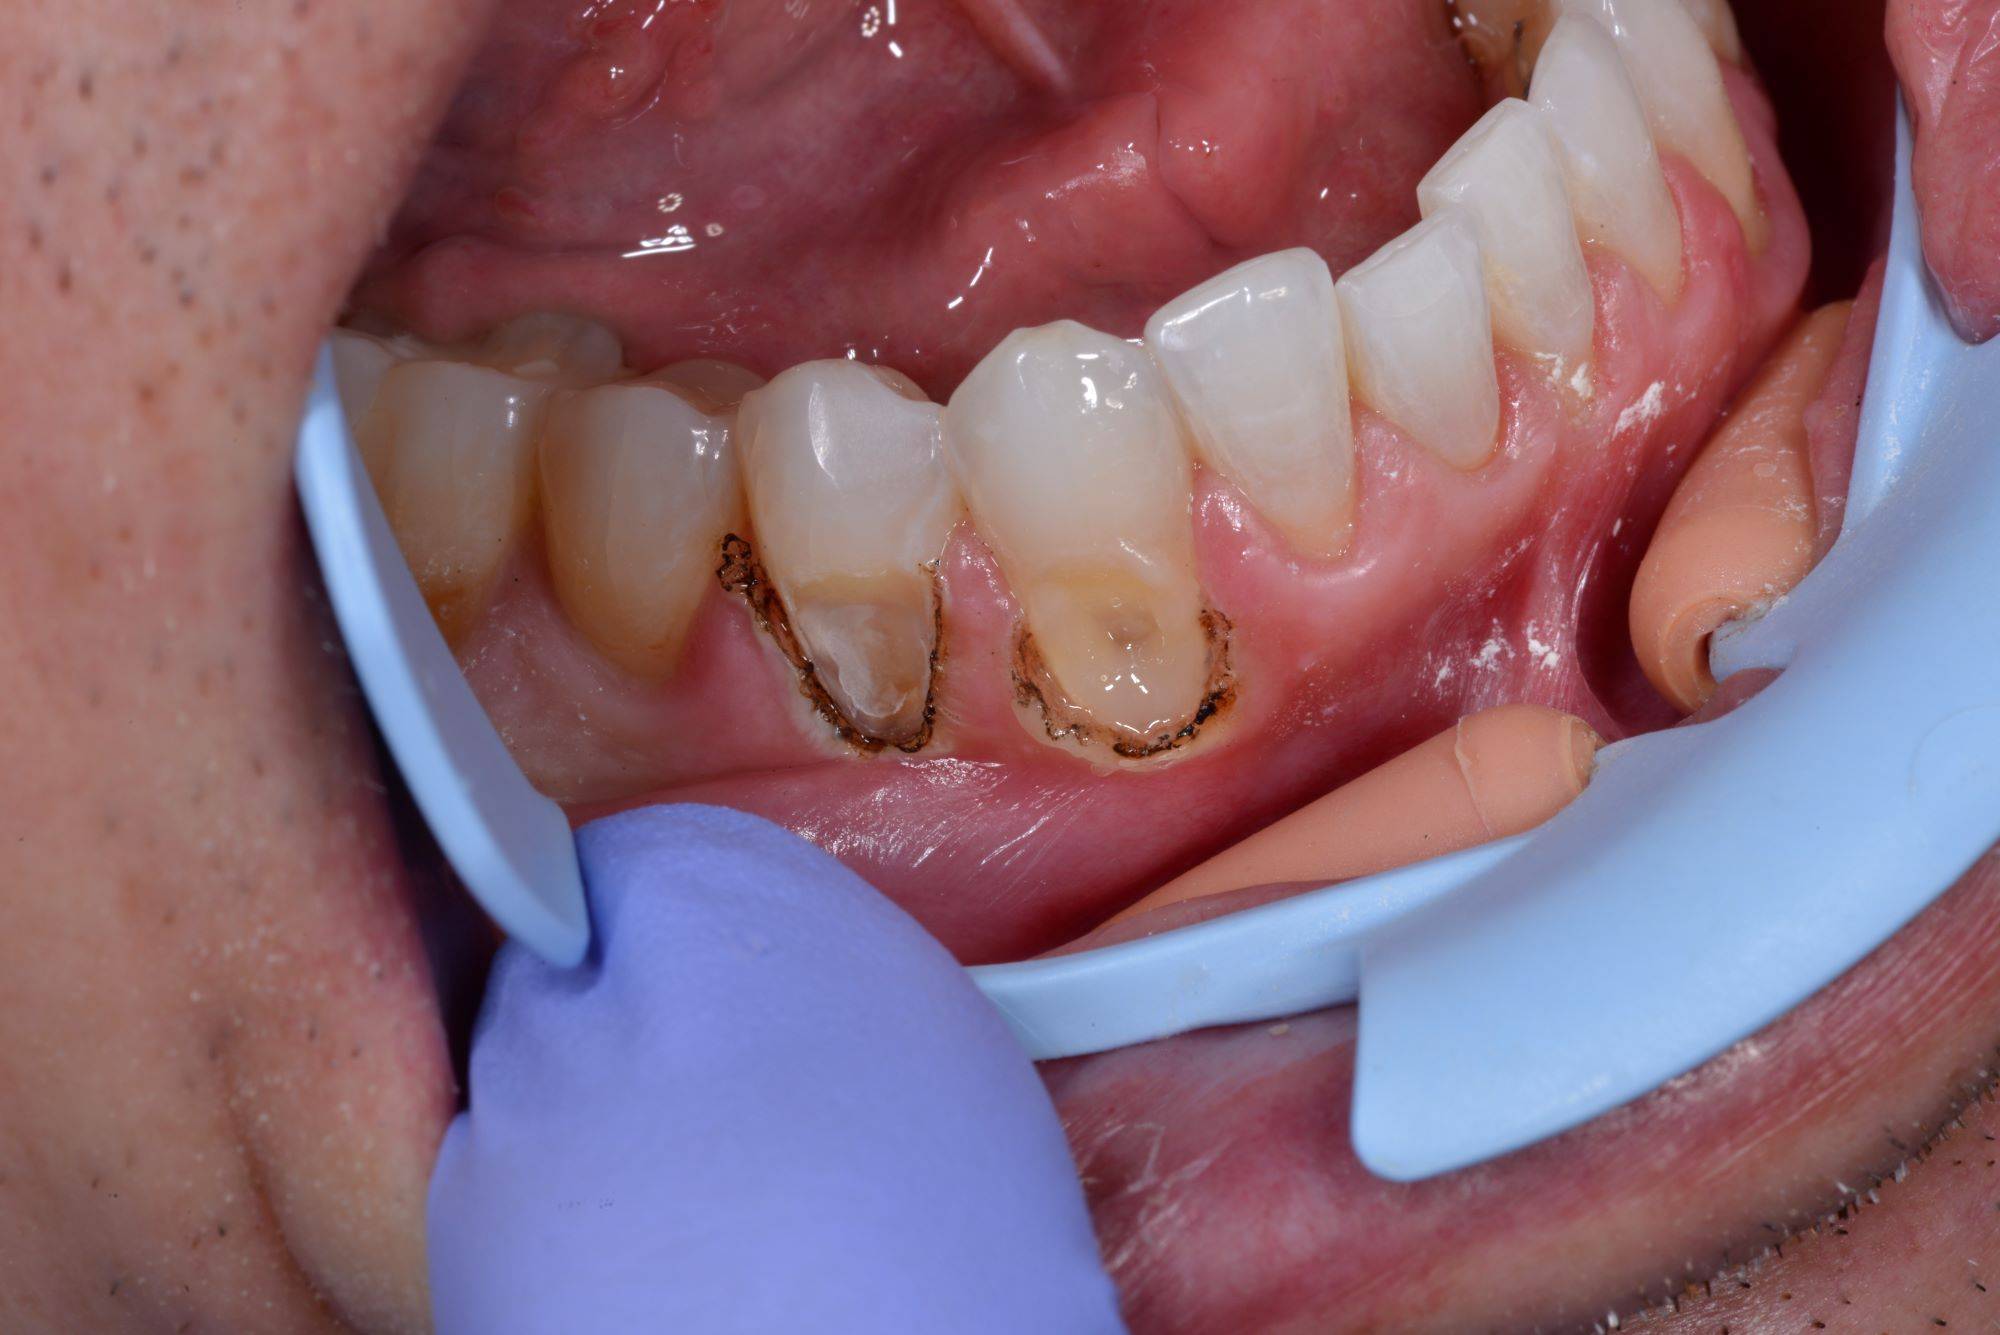 Subgingival decay exposed with burnt gums around it